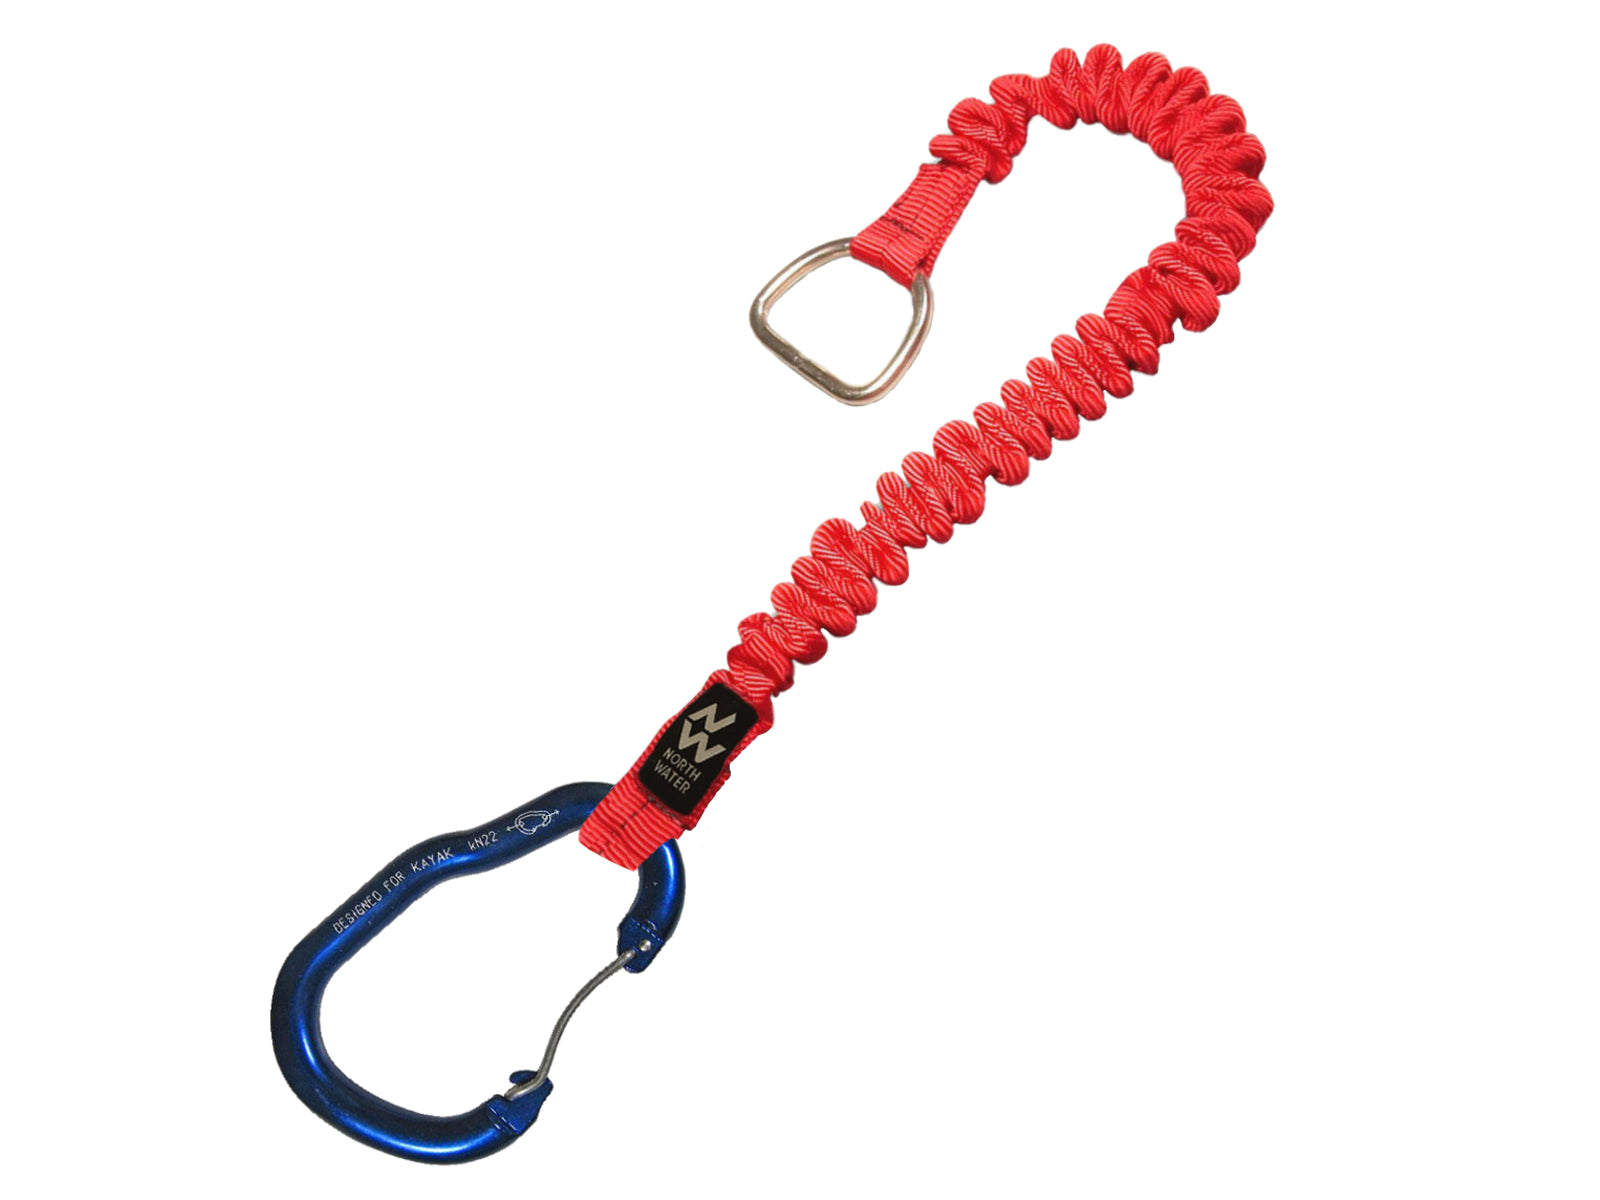 North Water - Pig Tail w/ Carabiner (22Kn)